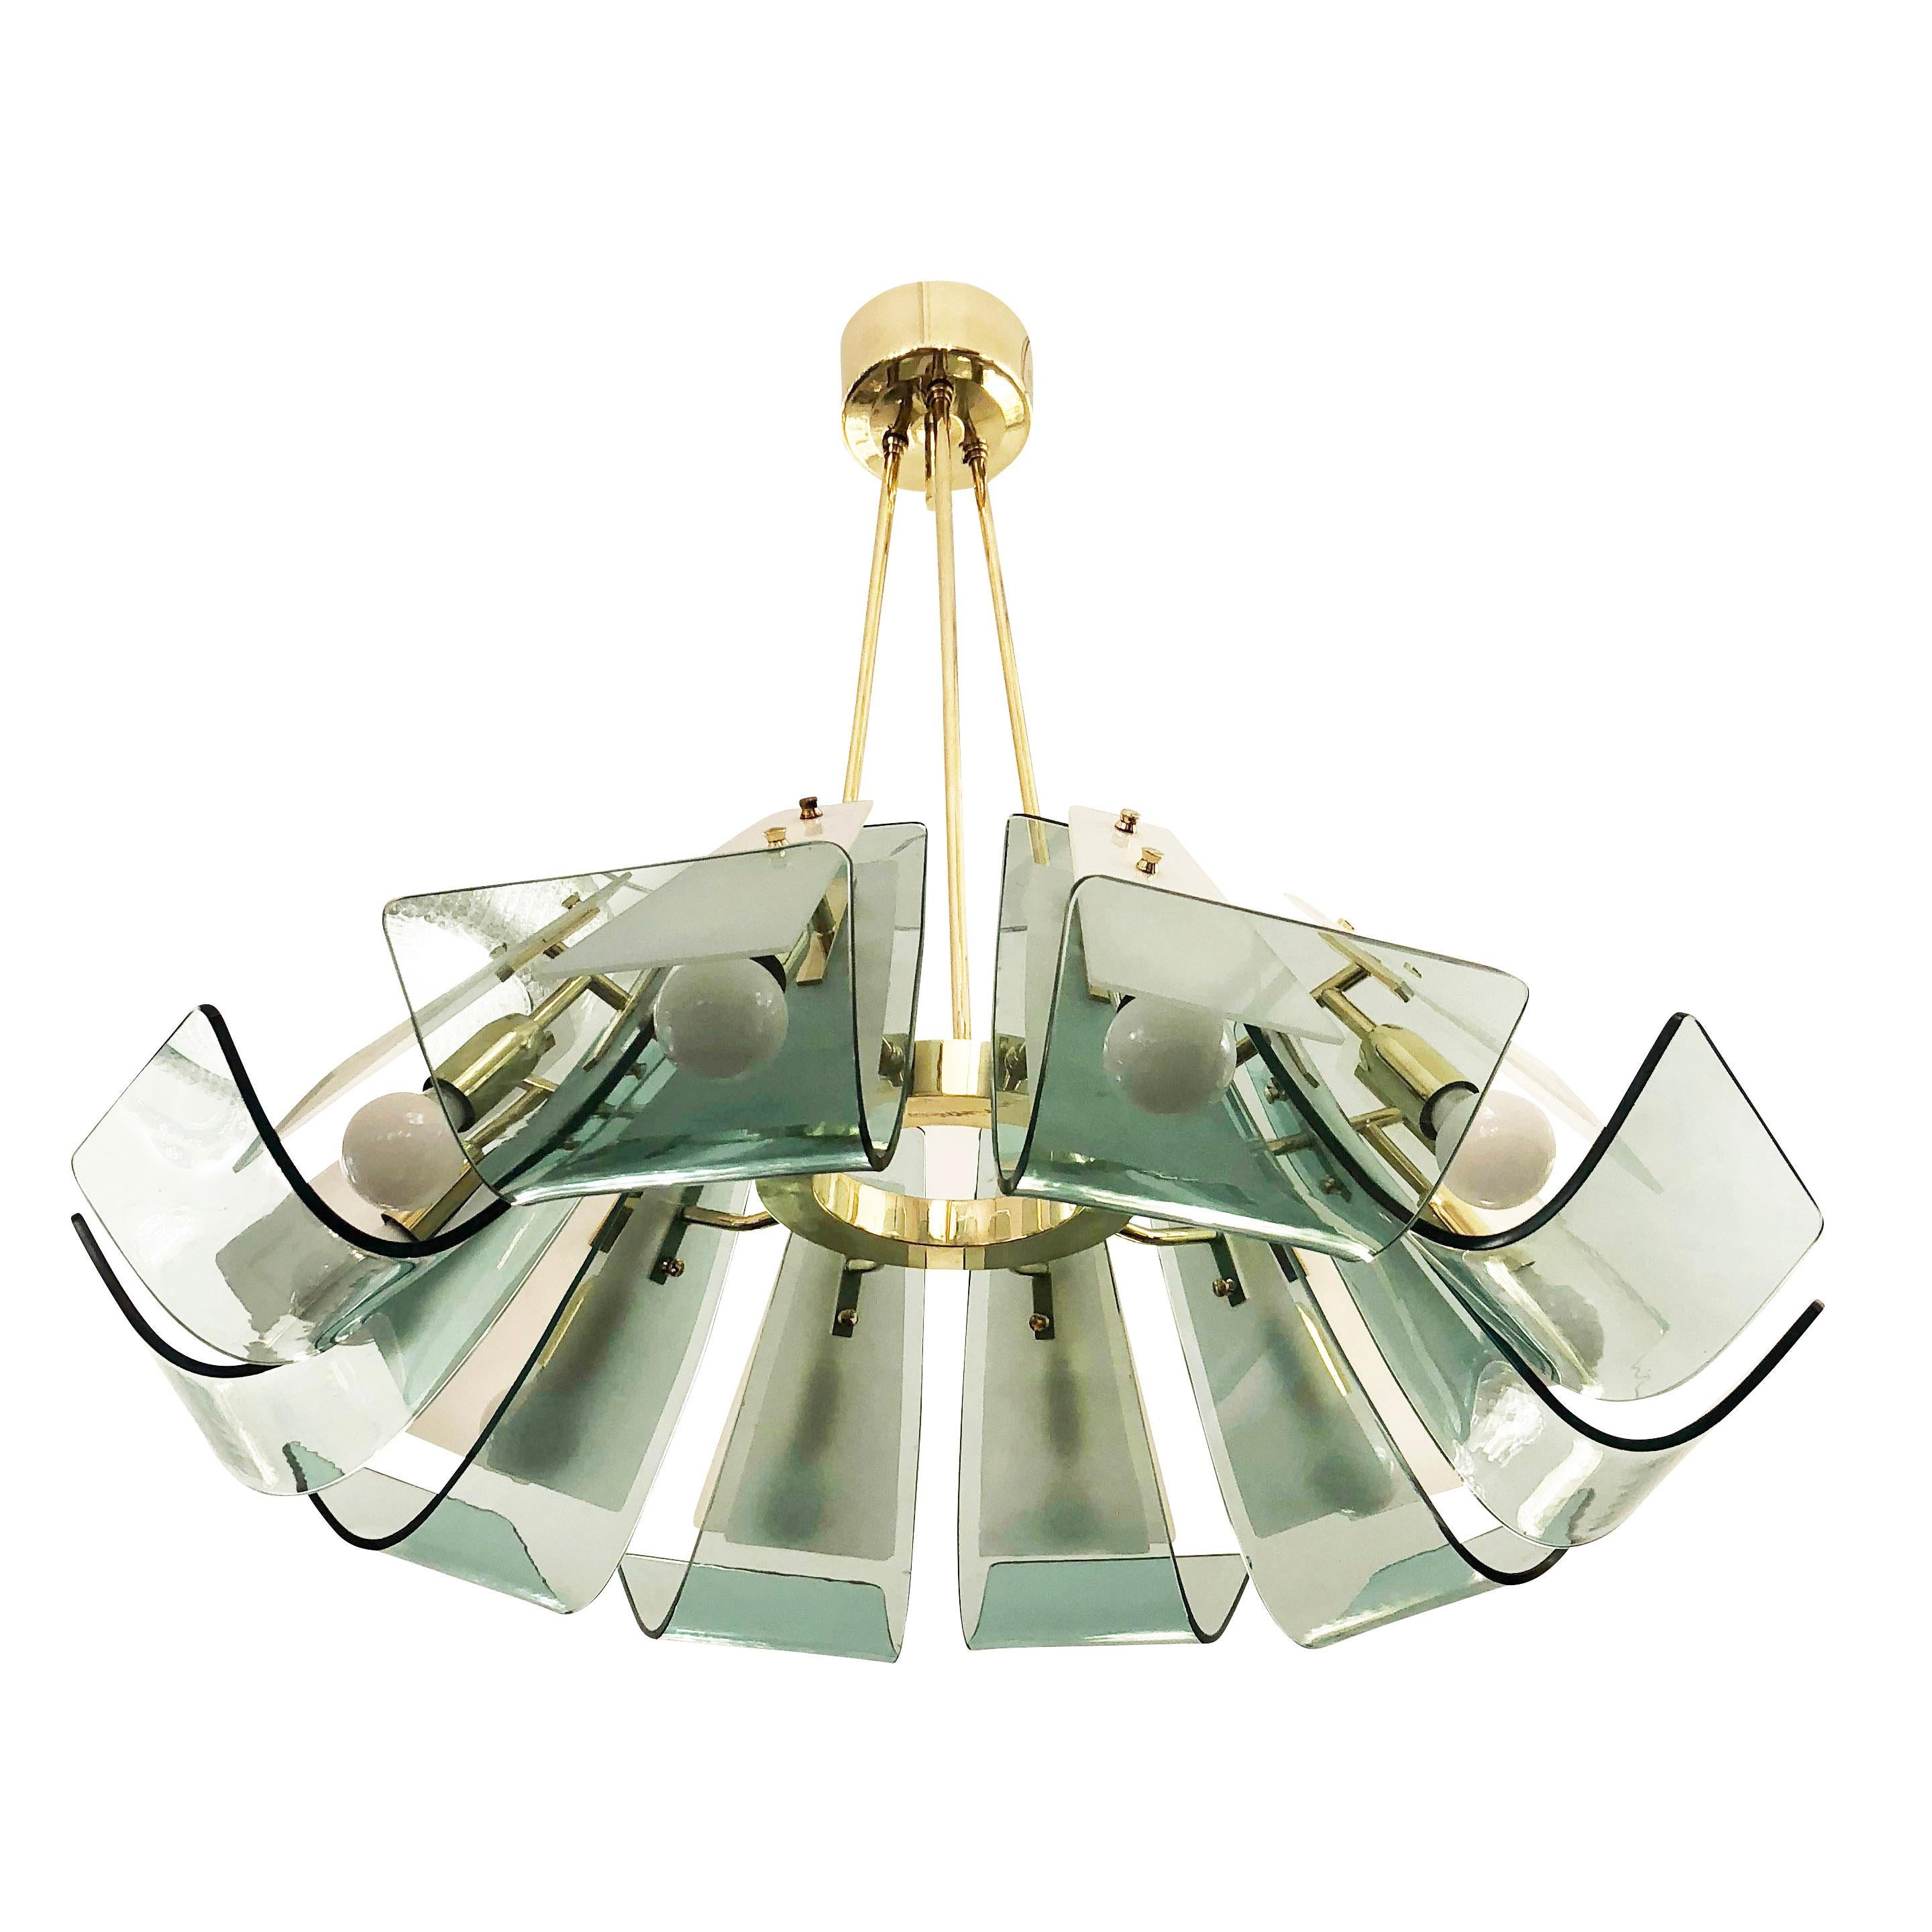 Italian midcentury chandelier by Paroldo featuring ten curved laguna green glasses on a brass frame. Each arm also has a frosted glass cover to help conceal the light sources. Overall height can be adjusted on request.

Condition: Excellent